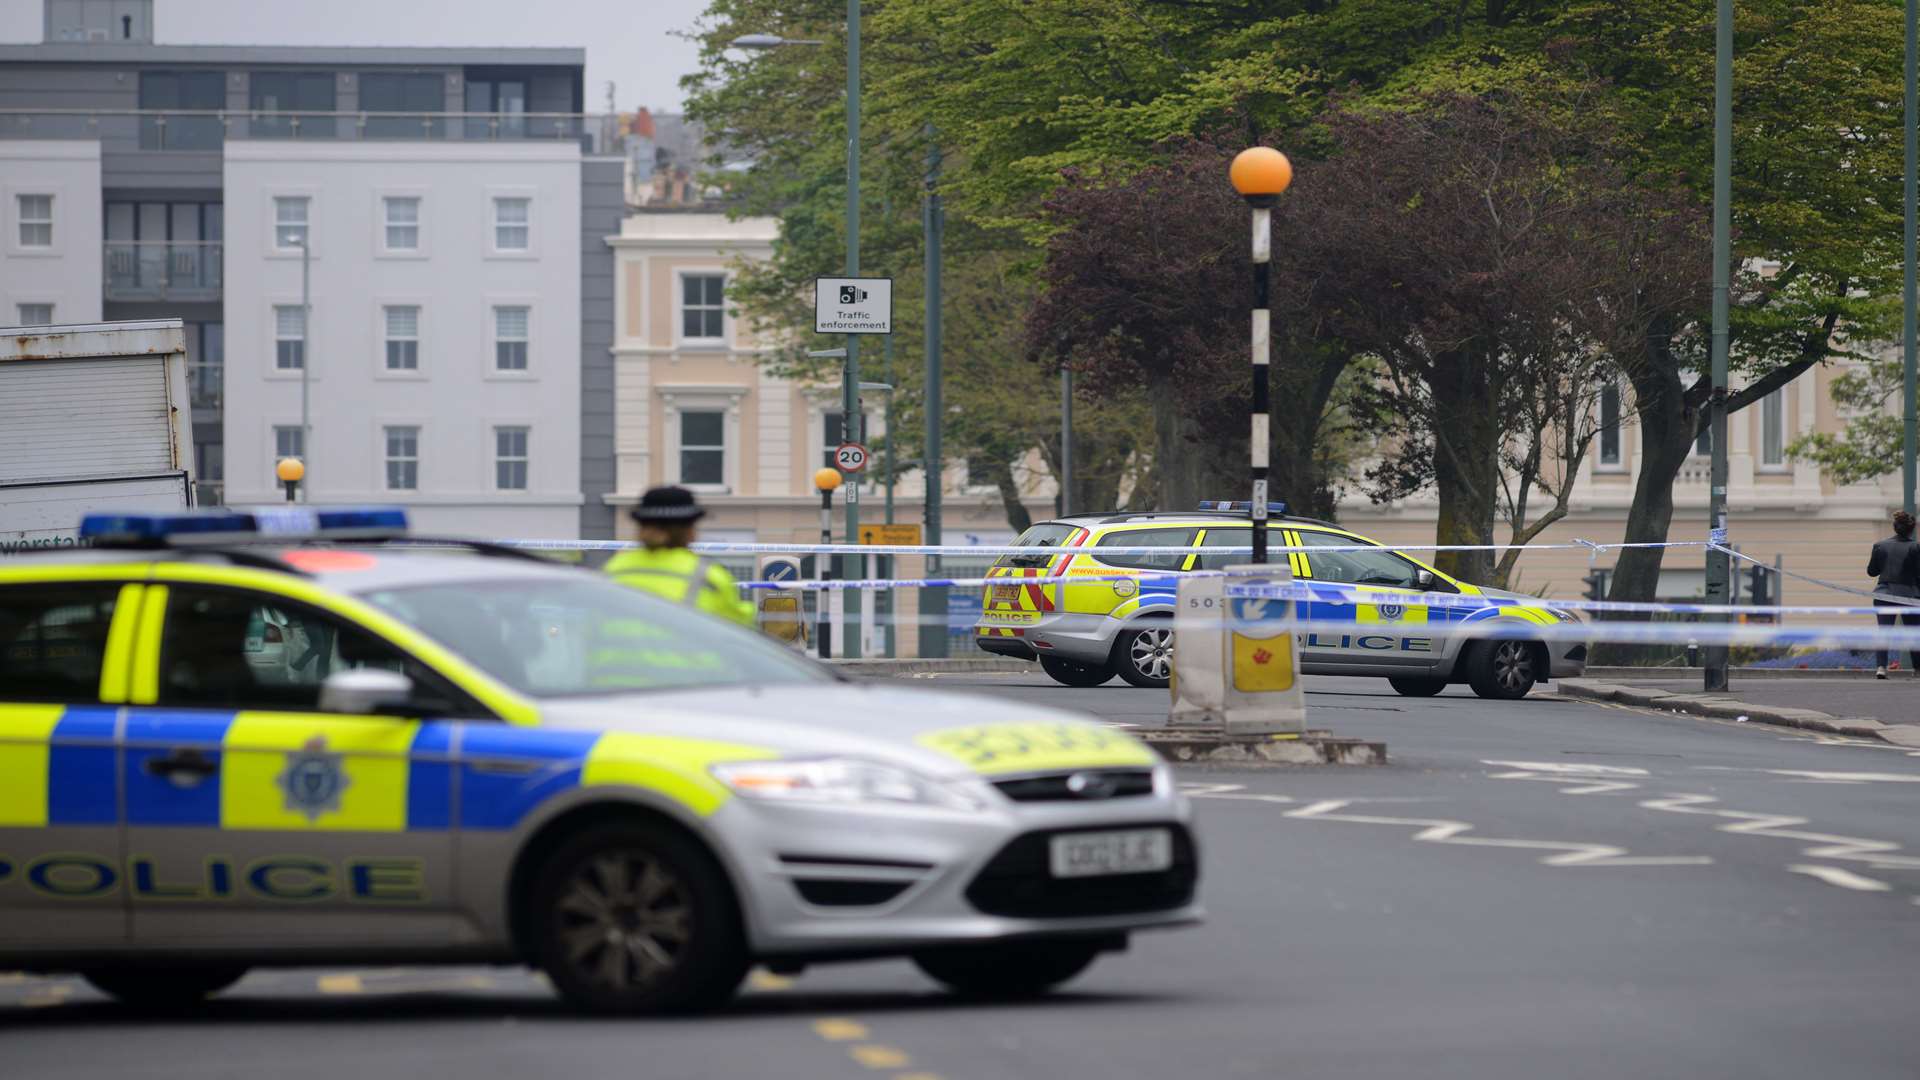 Police at the spot where Xhem Krasniqi was shot in Hove. Picture: The Argus